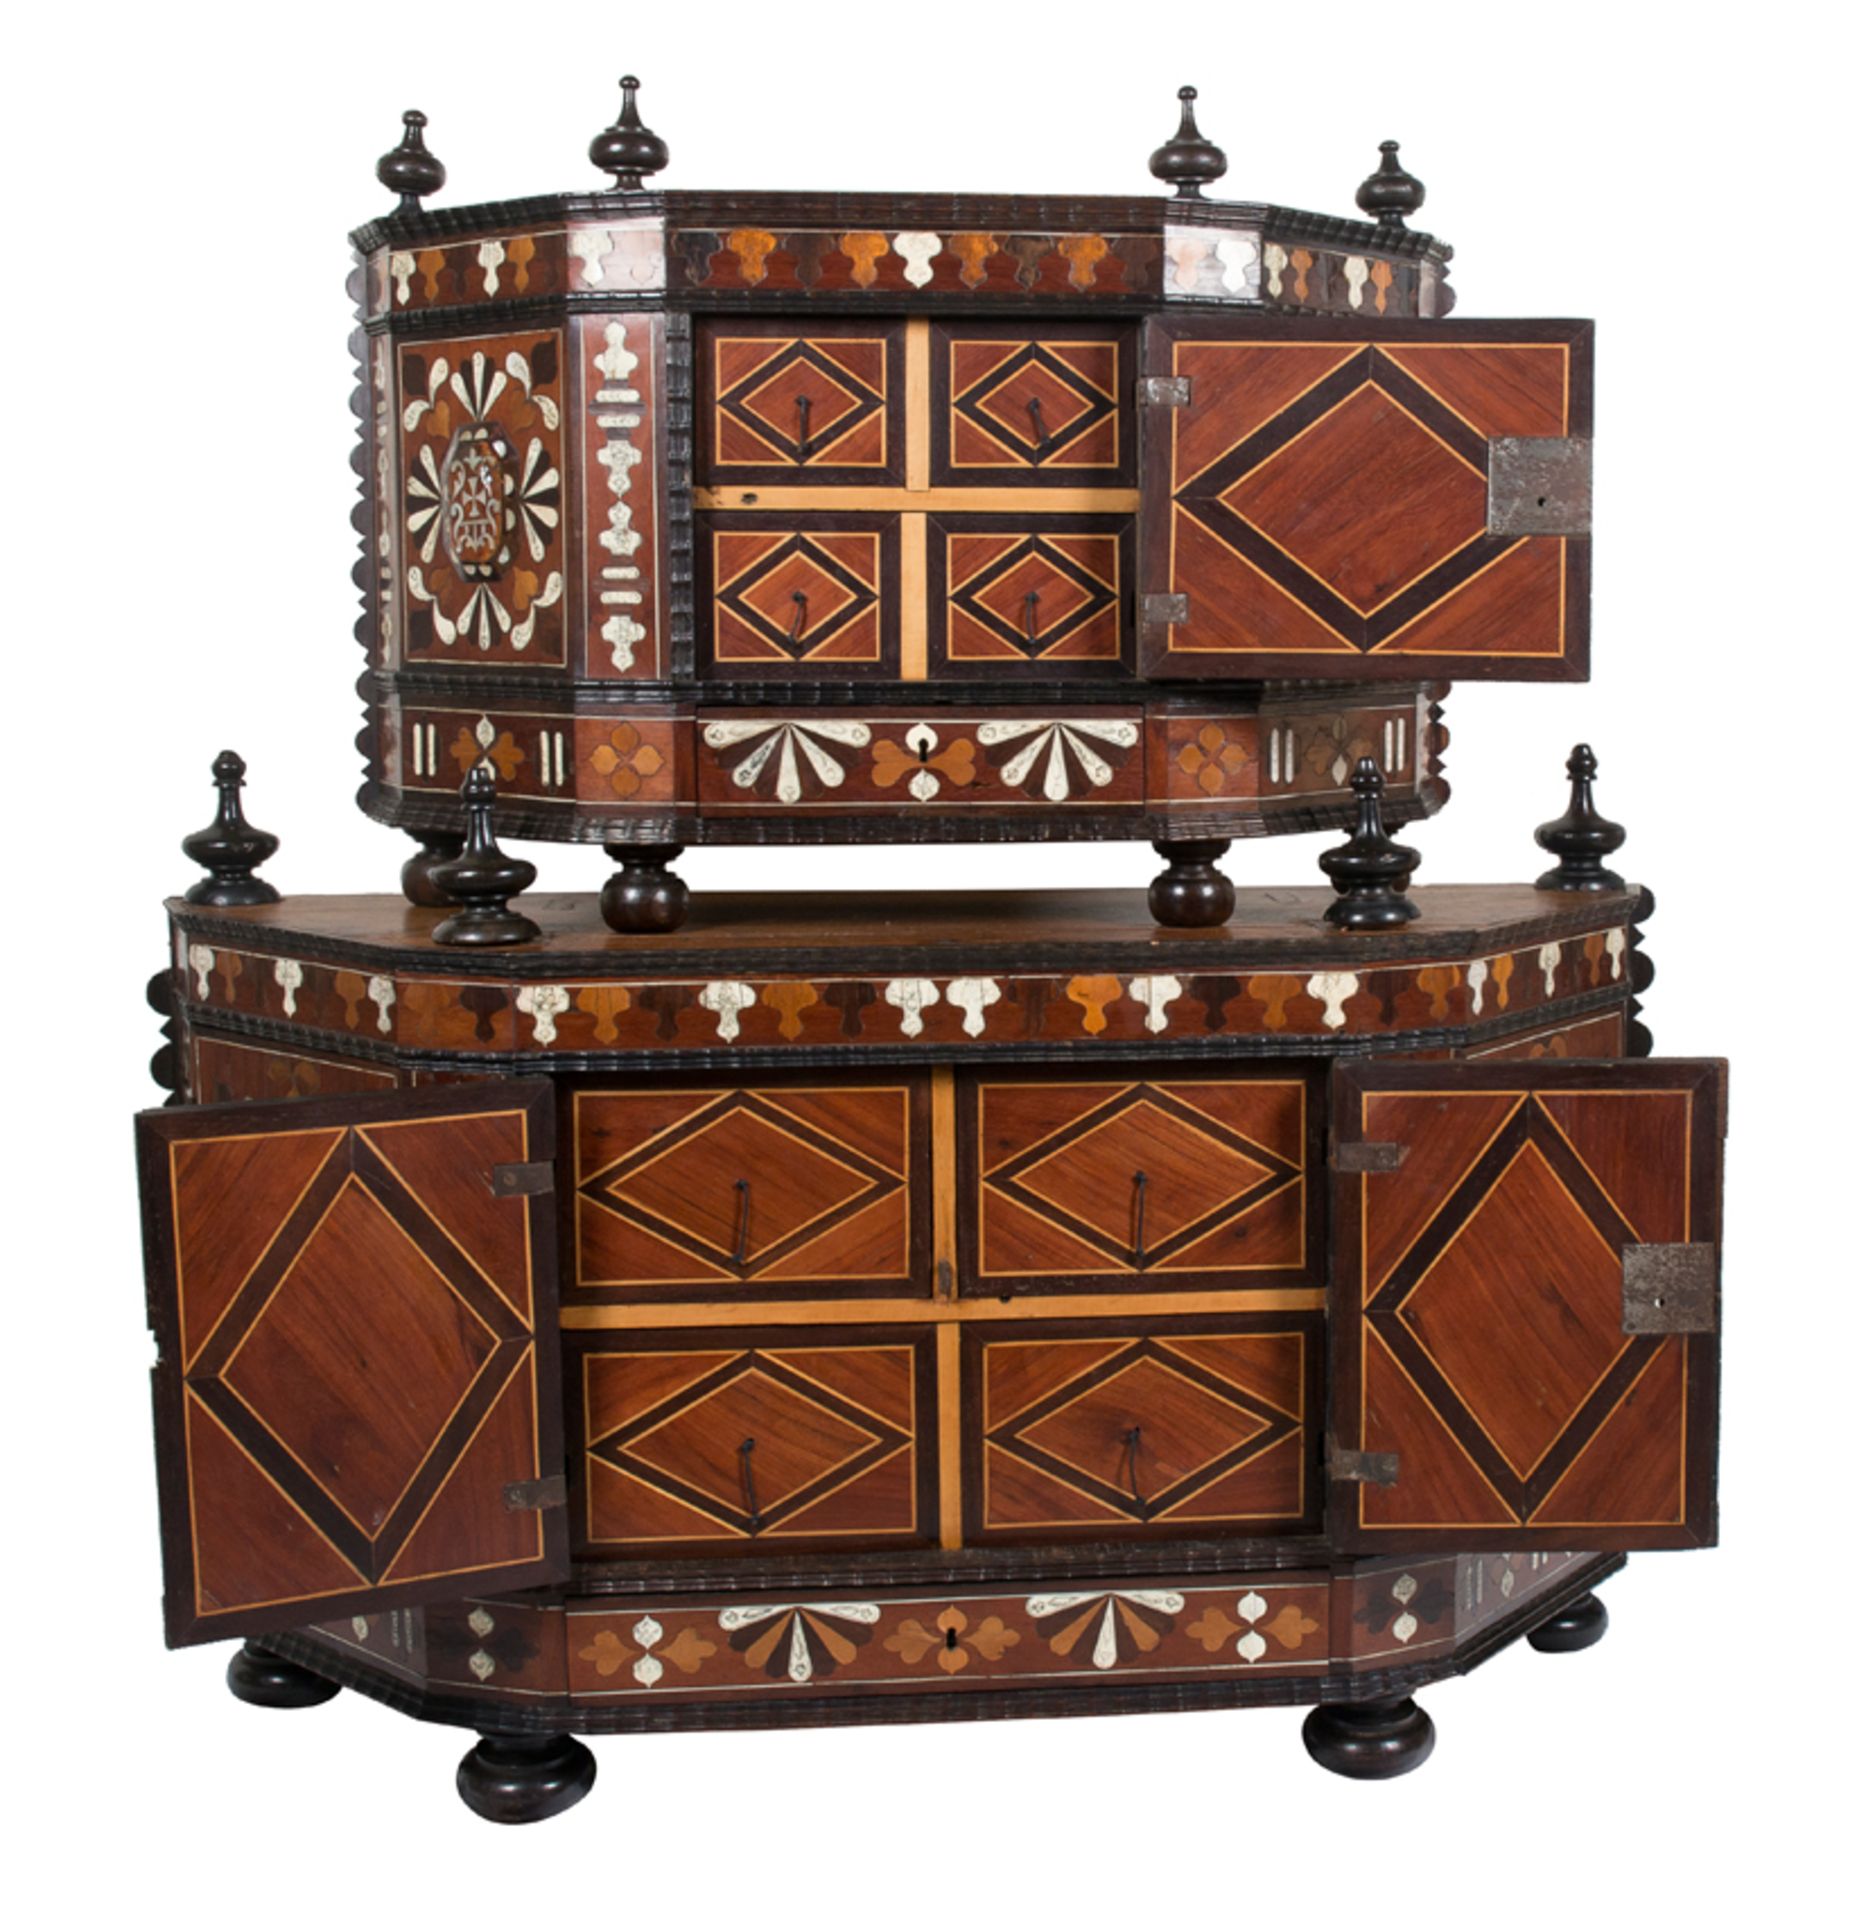 Imposing writing cabinet set with its "contador". Lima. Viceroyalty of Peru. 18th century. - Bild 6 aus 9